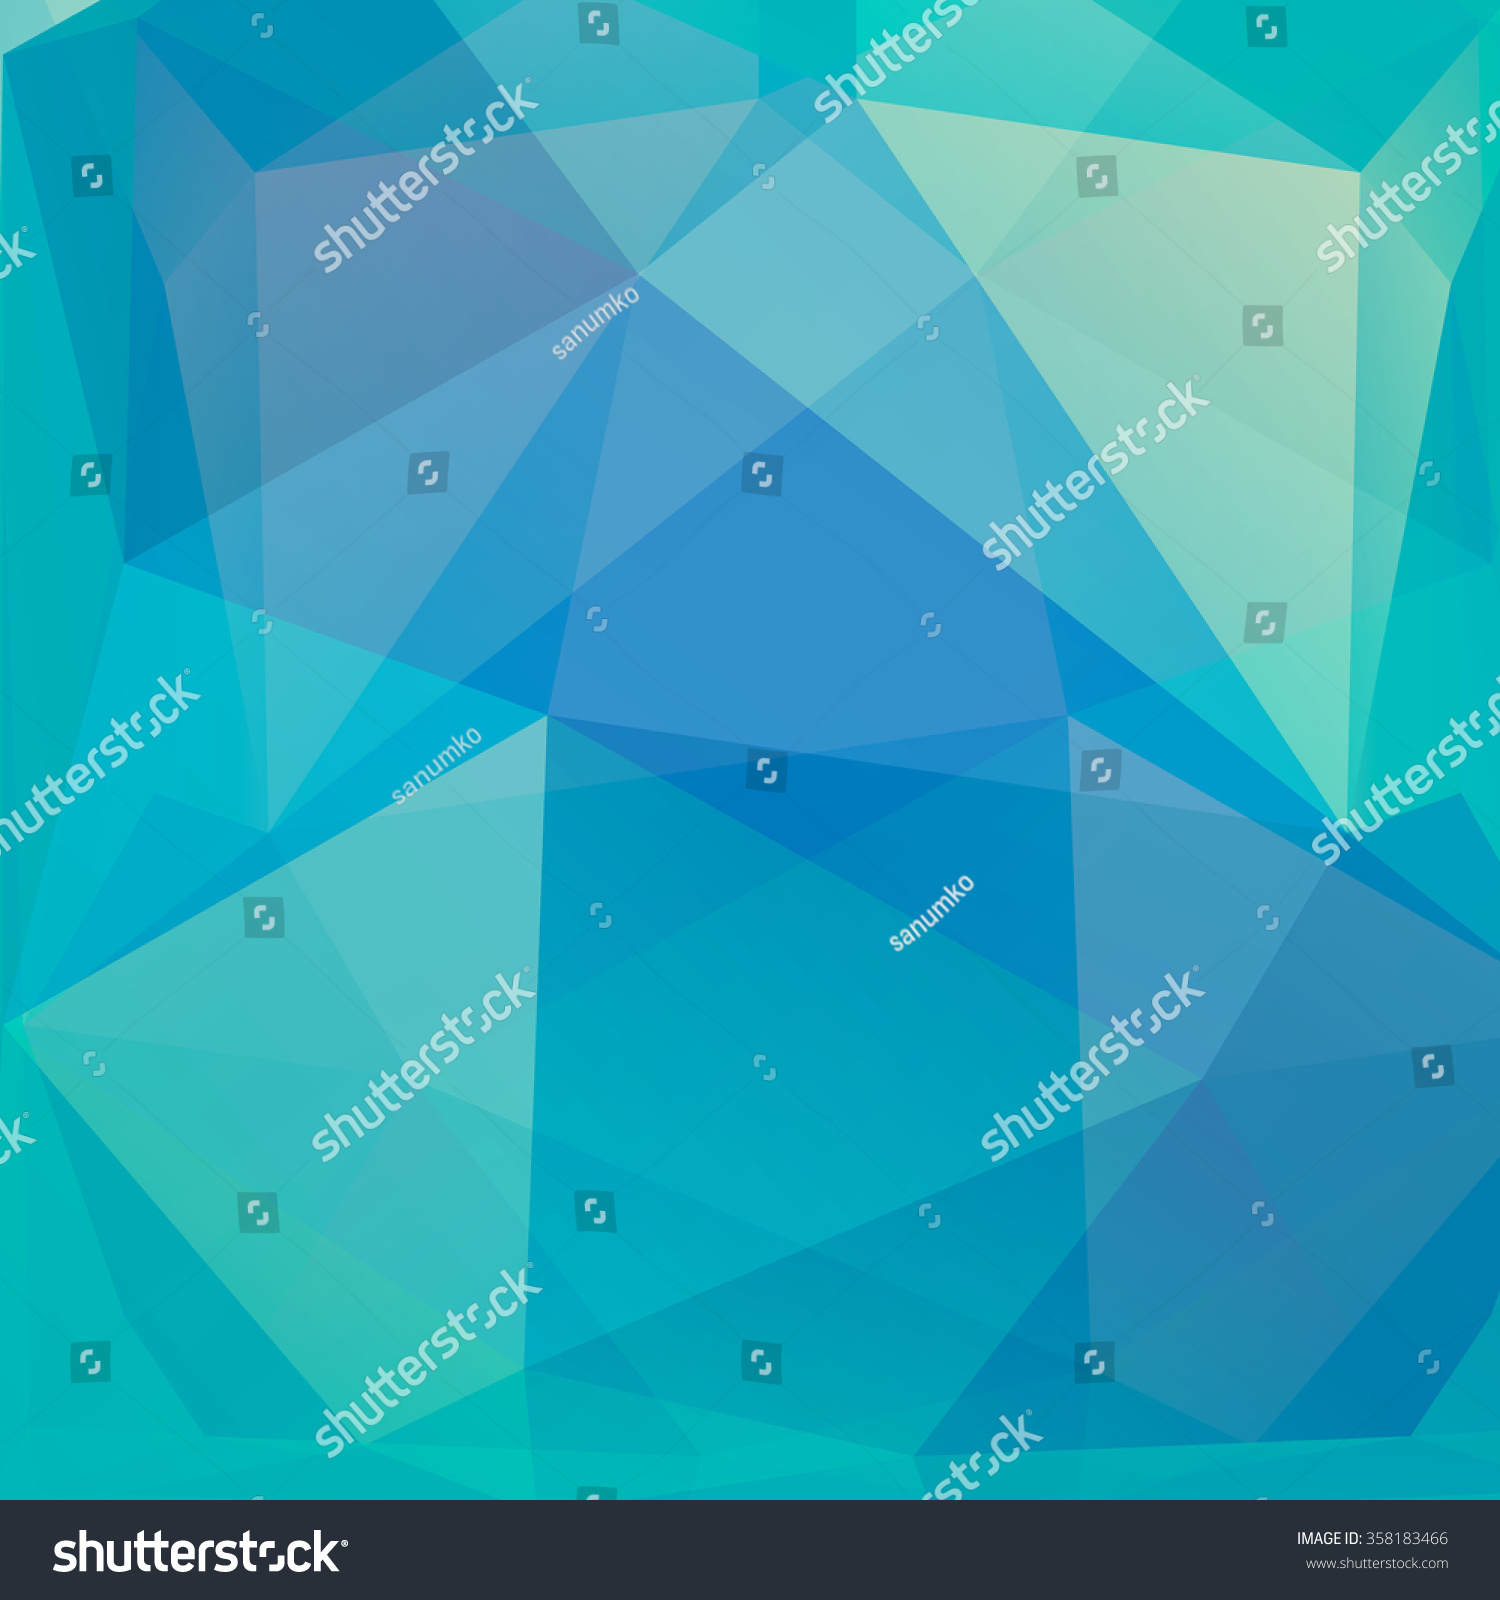 Abstract Low Poly Background Mobile Apps Stock Vector 358183466